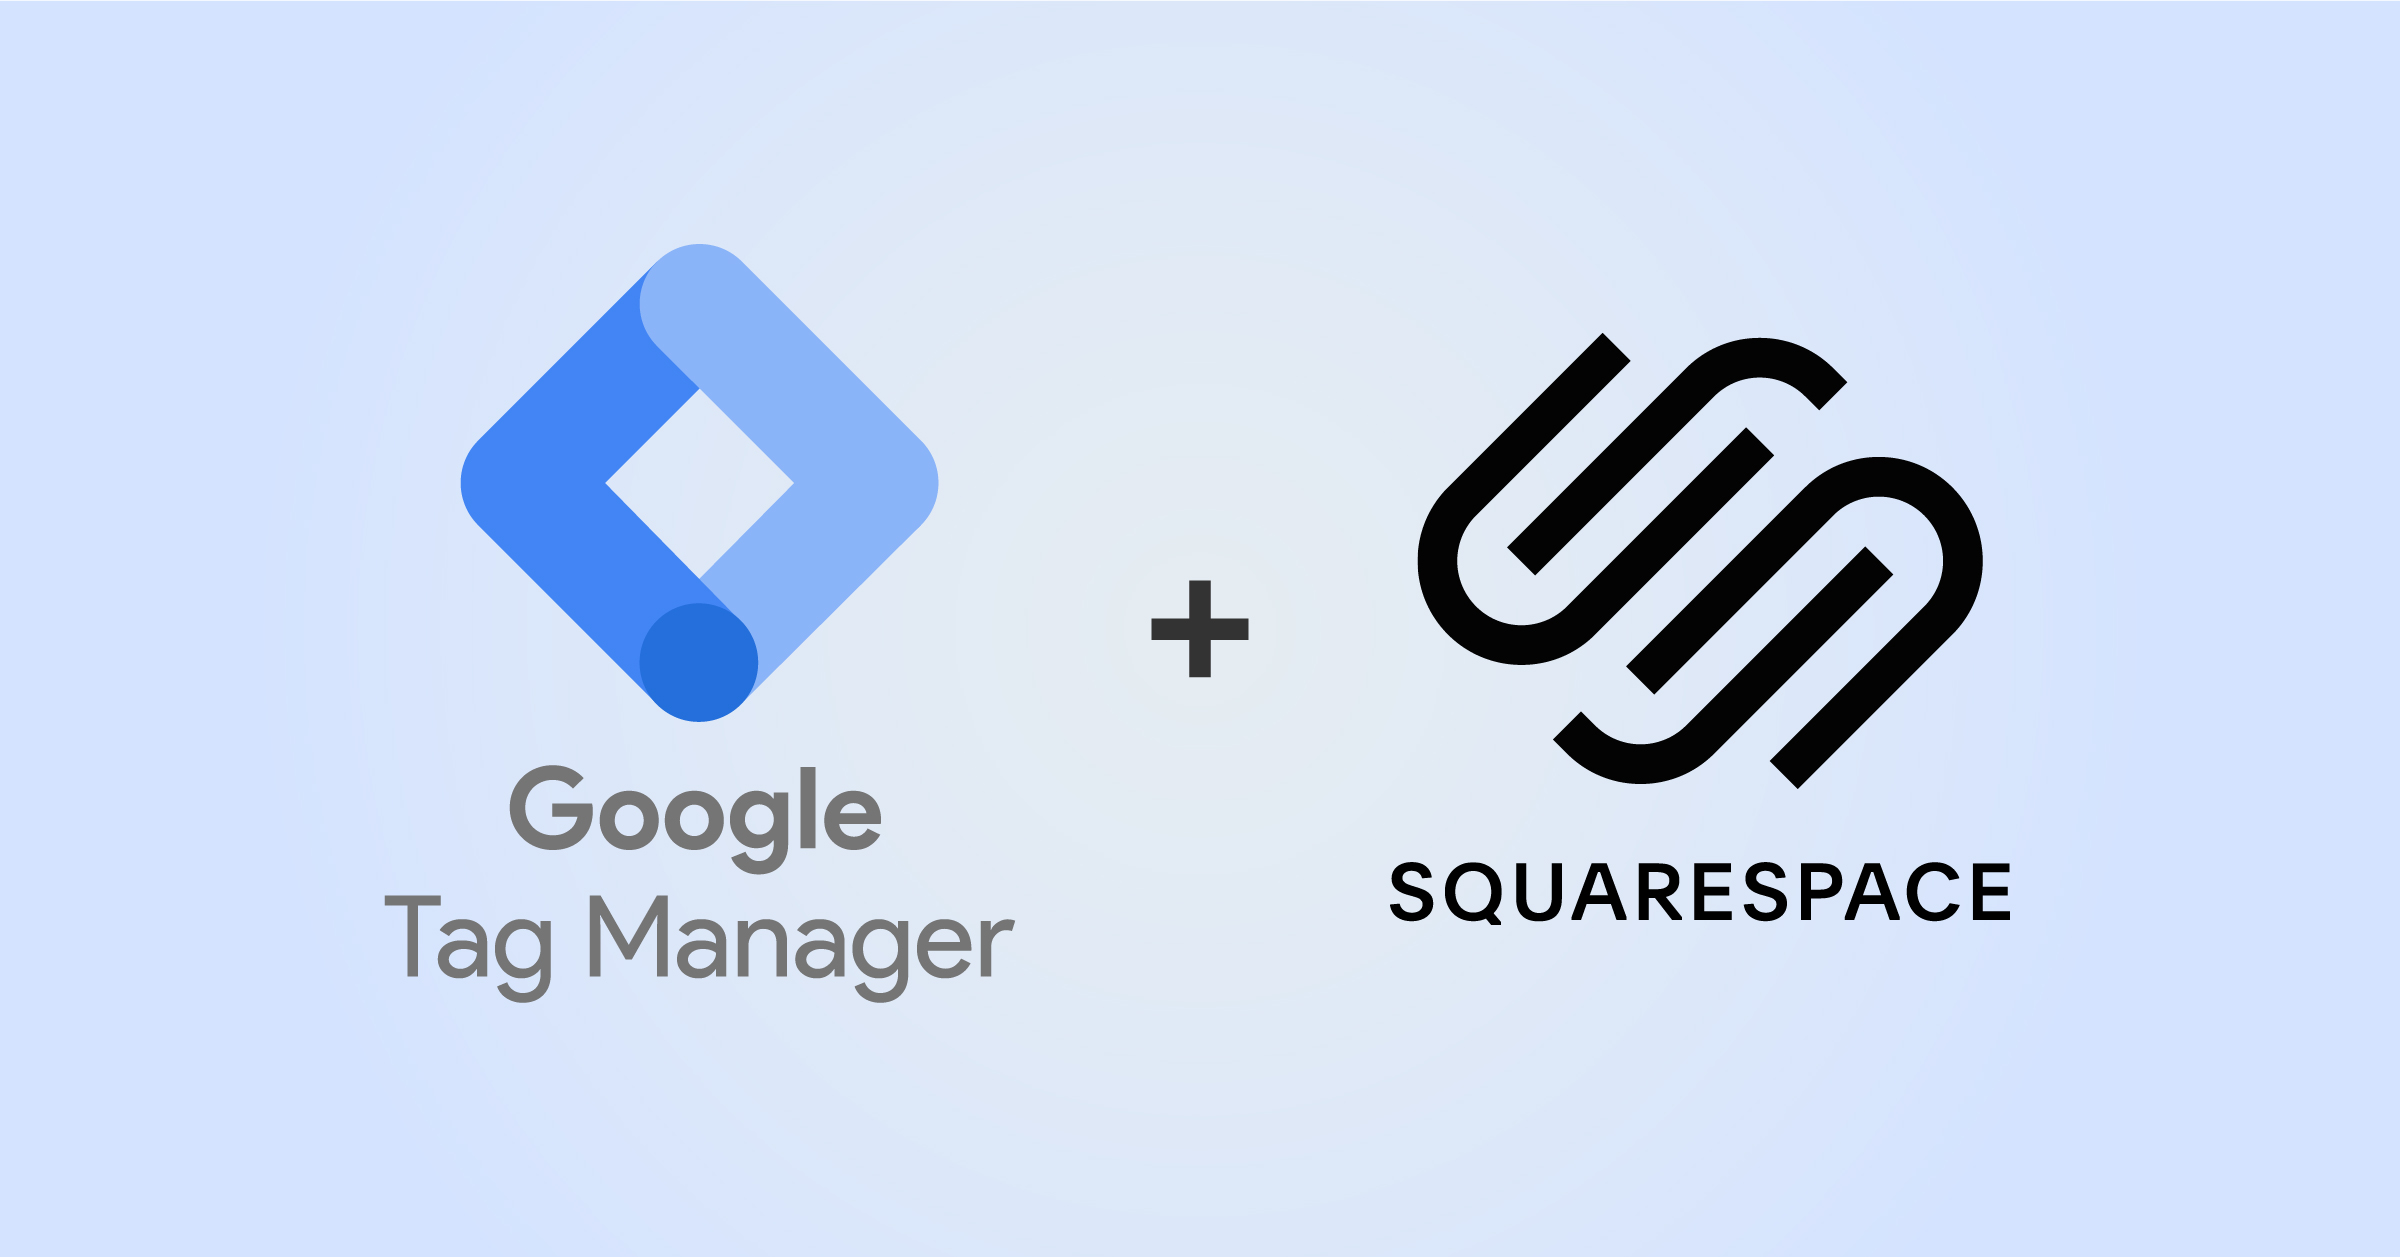 Google Tag Manager and Squarespace